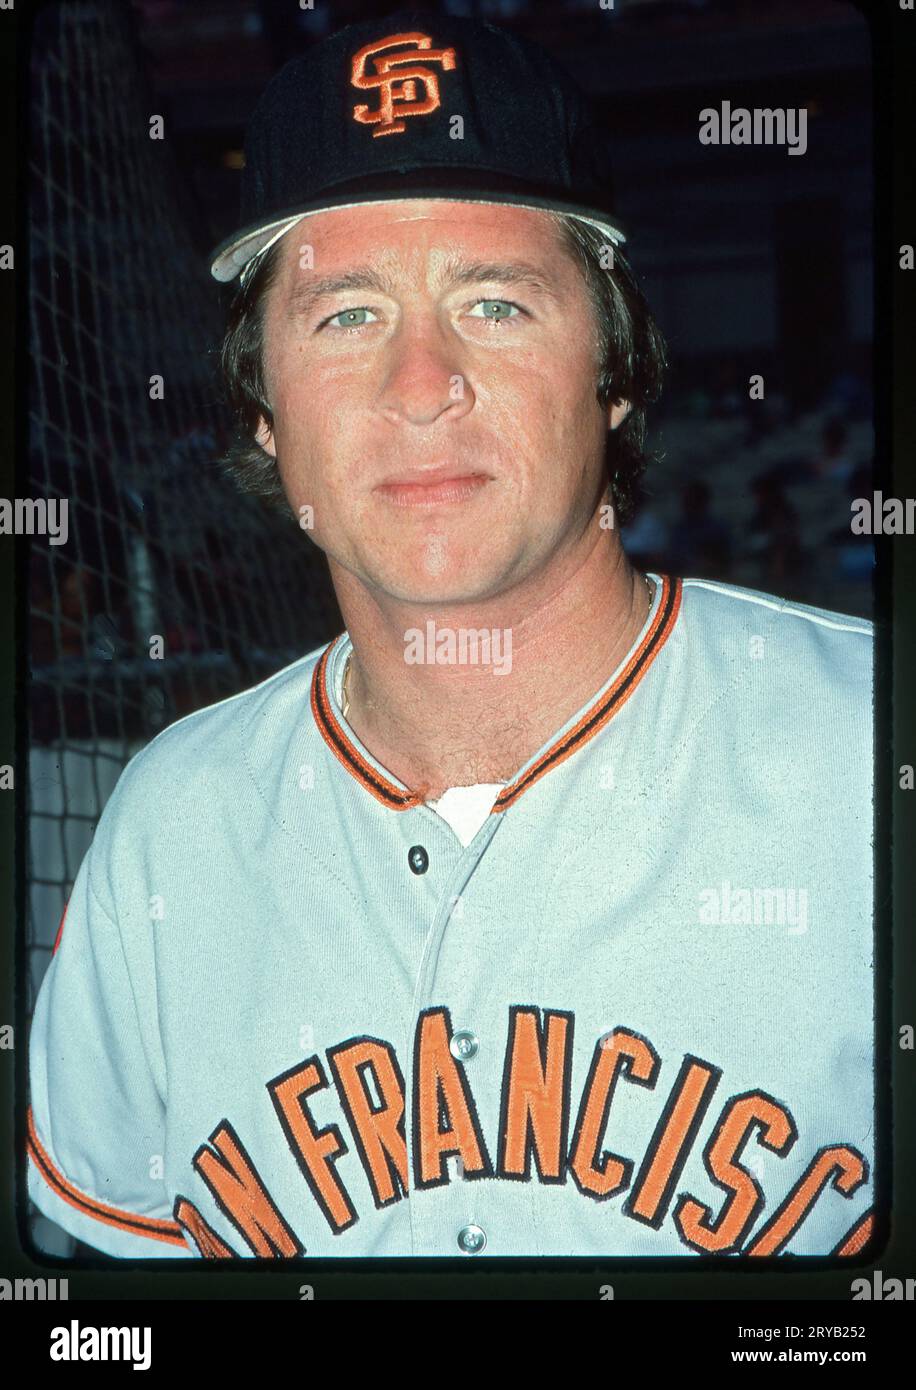 Bobby Murcer, a baseball player who played most of his career for the New York Yankees. He's seen here in 1976 in one of his 2 seasons with the San Francisco Giants. Photographed in 1976 at Shea Stadium in Flushing, Queens, New York. Stock Photo